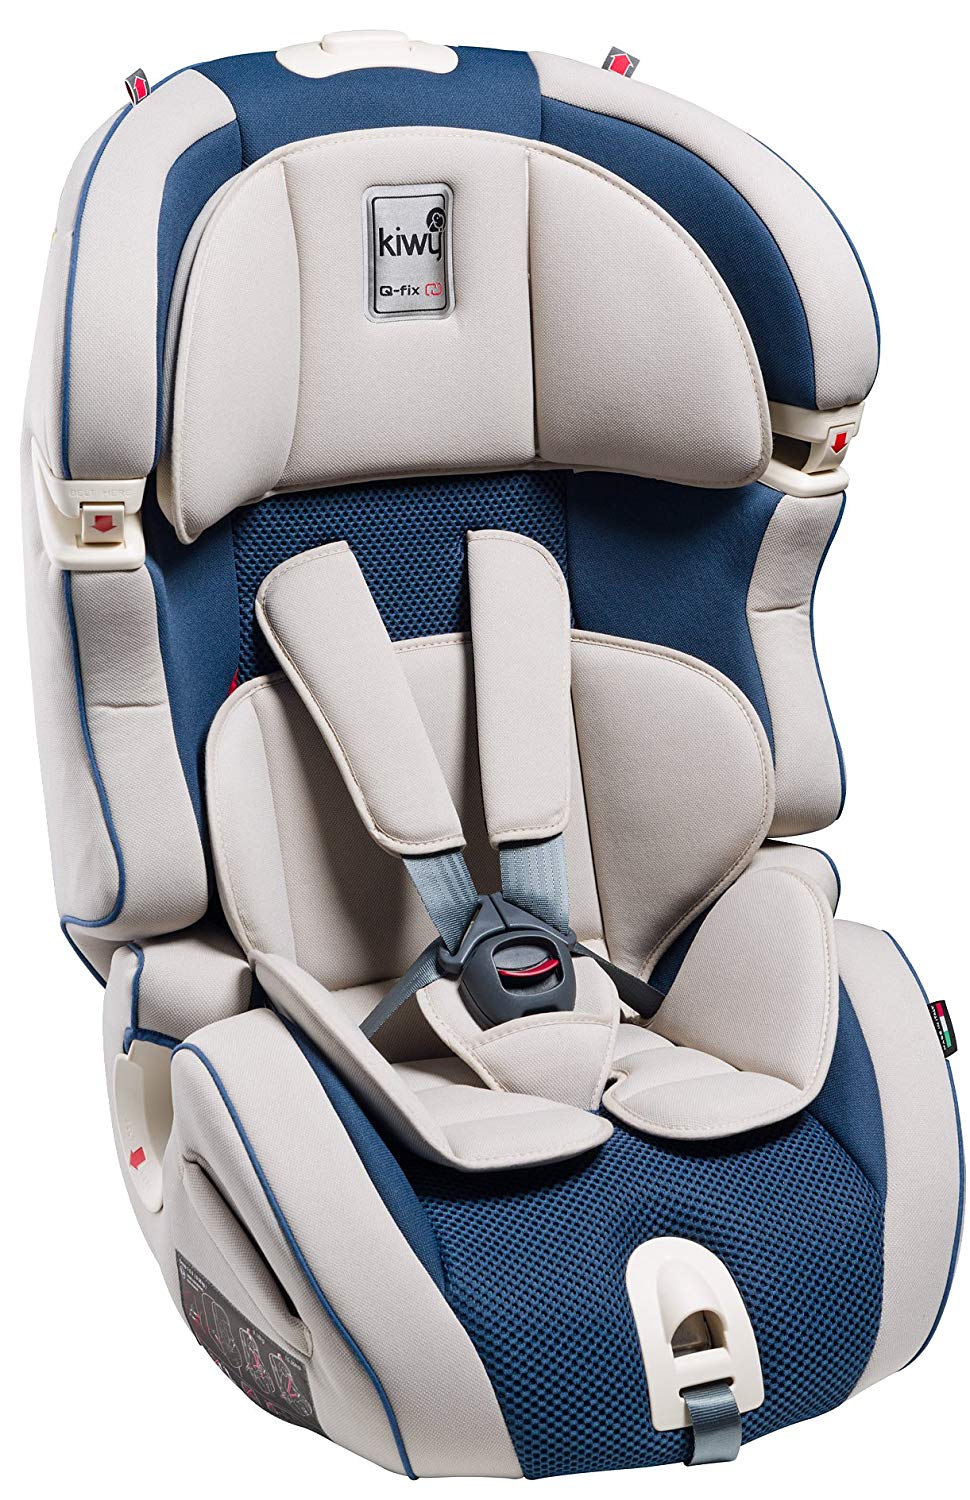 Kiwy SLF123 Q (14103KW06B Child Car Seat Group 1/2/3 9-36 kg with Q-Fix Adapter for Isofix Child Car Safety Seat ECE R44/04, Ocean